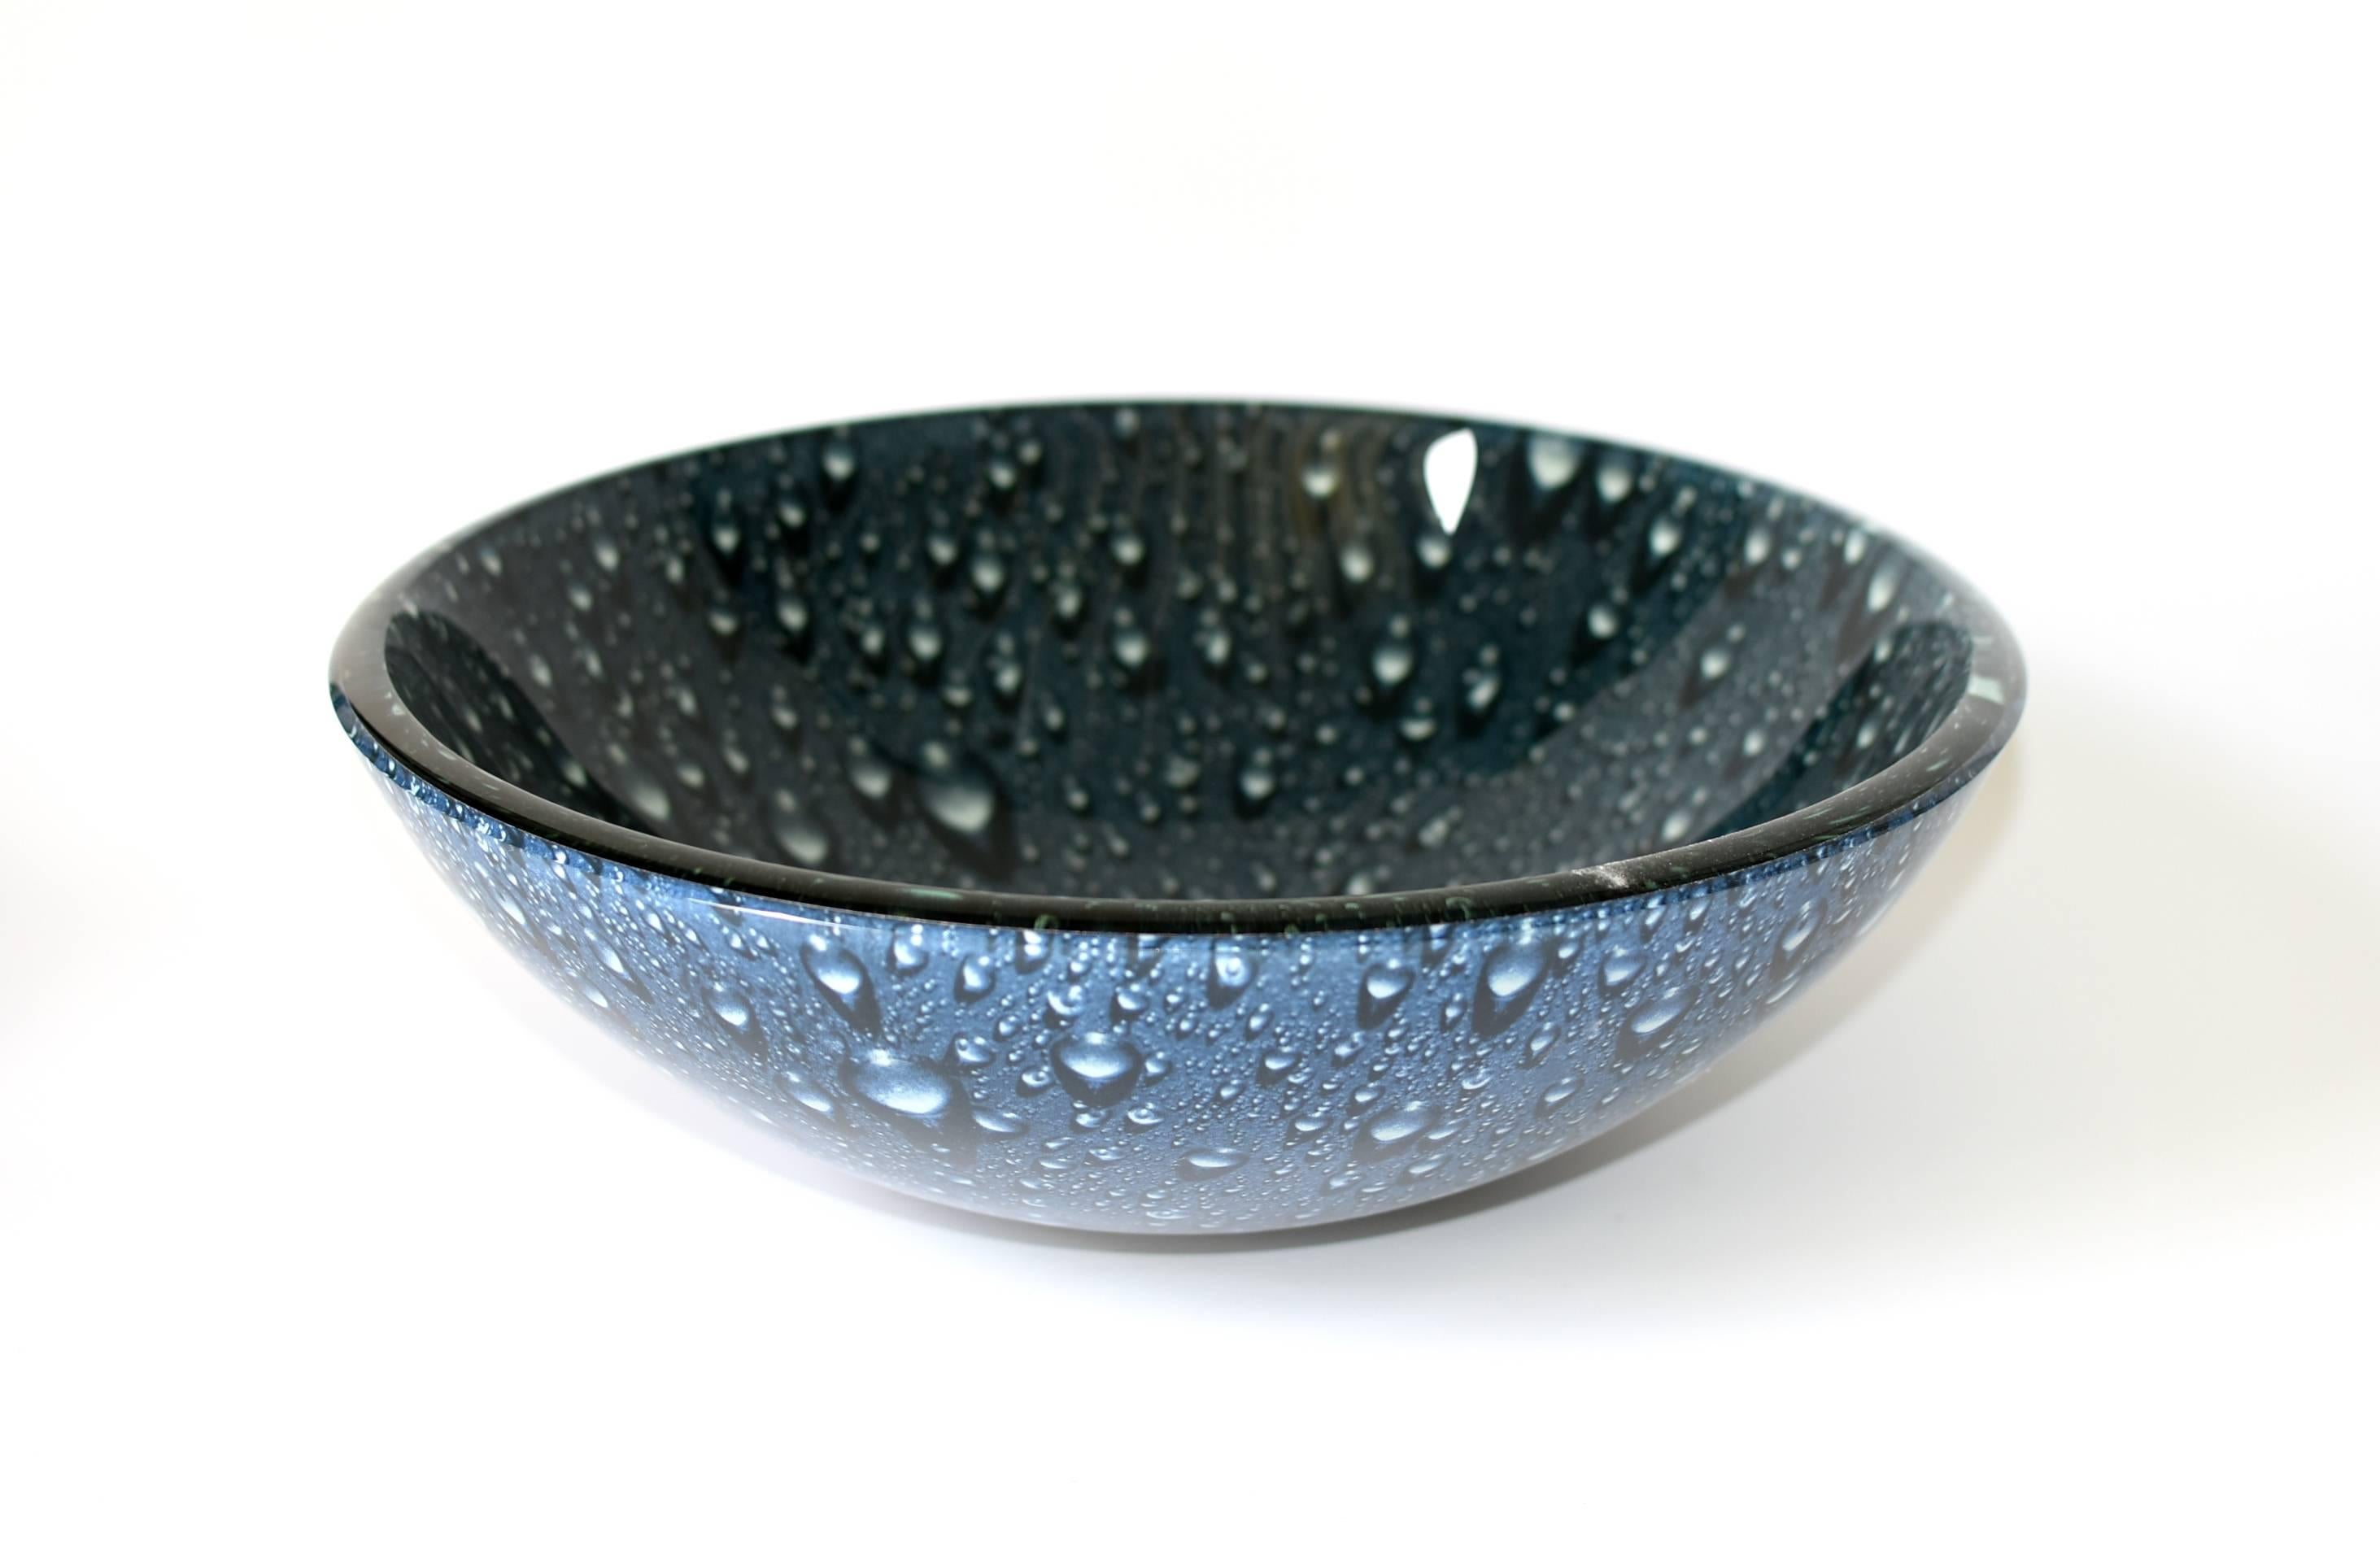 Beautiful dark blue glass sink with a rain drop pattern and a lighter blue exterior. The sink is heavy and substantial, rings like crystal. The rain drop pattern adds a modern and romantic touch to the piece. The bowl is glass, wider, lower height